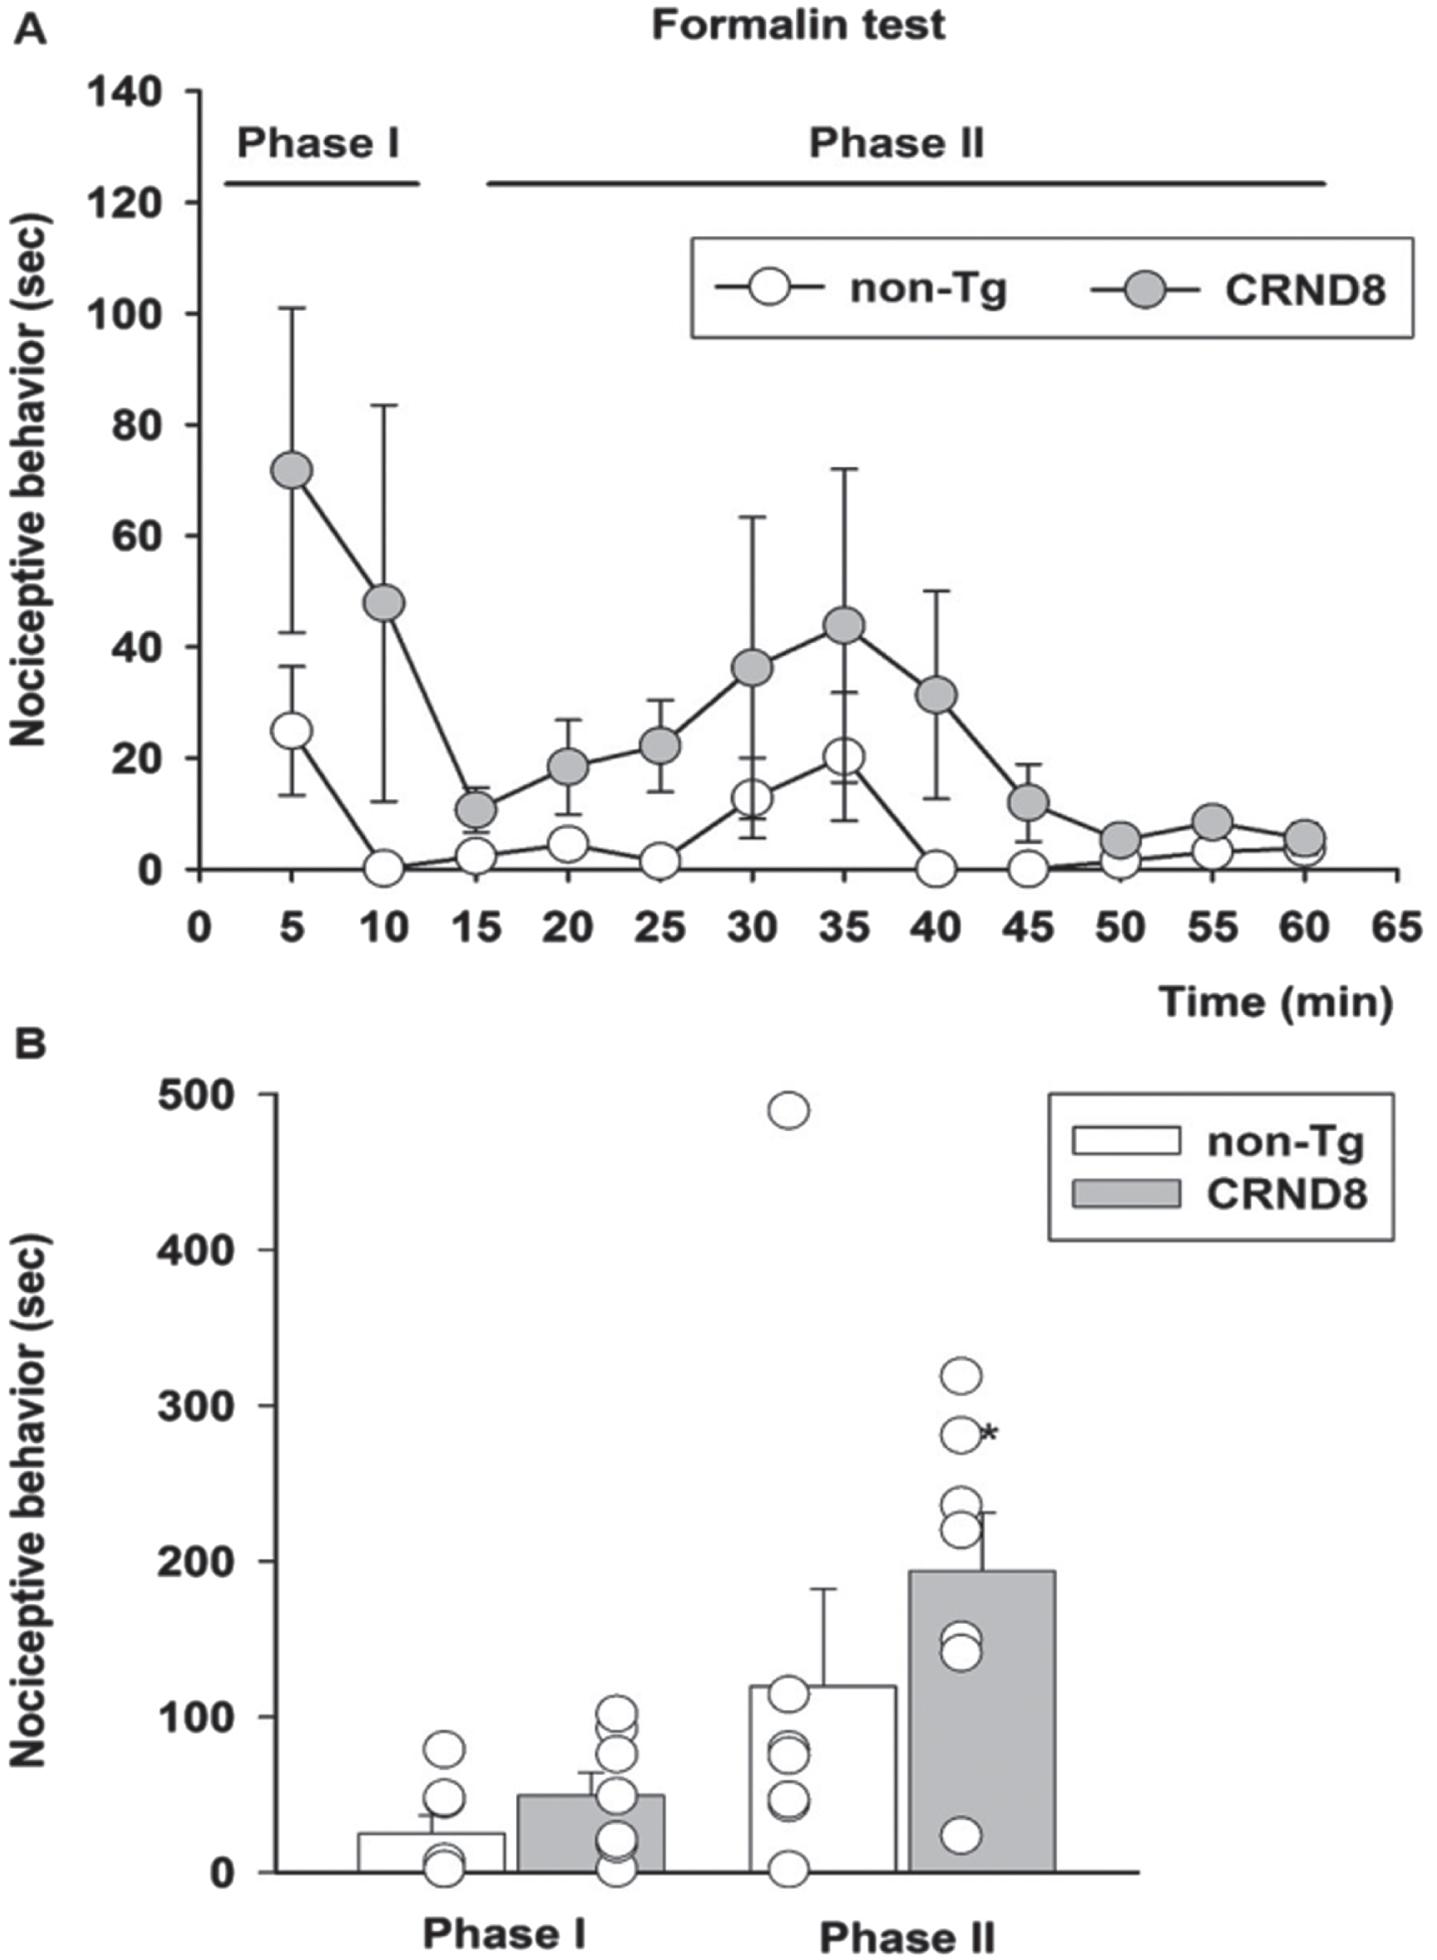 Enhanced pain behavior after formalin injection in CRND8 mice. In (A) the time course of formalin-induced pain behavior (as duration of licking and flinching responses) in CRND8 and non-Tg mice is presented. In (B), pain responses were classified as phase I (0–10 min) and phase II (15–60 min) and were represented as mean±SEM in bar graphs showing individual values (n = 7 per genotype). A two-way repeated measures ANOVA with Bonferroni post-test for all pairwise multiple comparisons was carried out to analyze the effects of genotype and phase on pain responses. There was a statistically significant difference in pain response between CRND8 and non-Tg mice within phase II (p = 0.015).